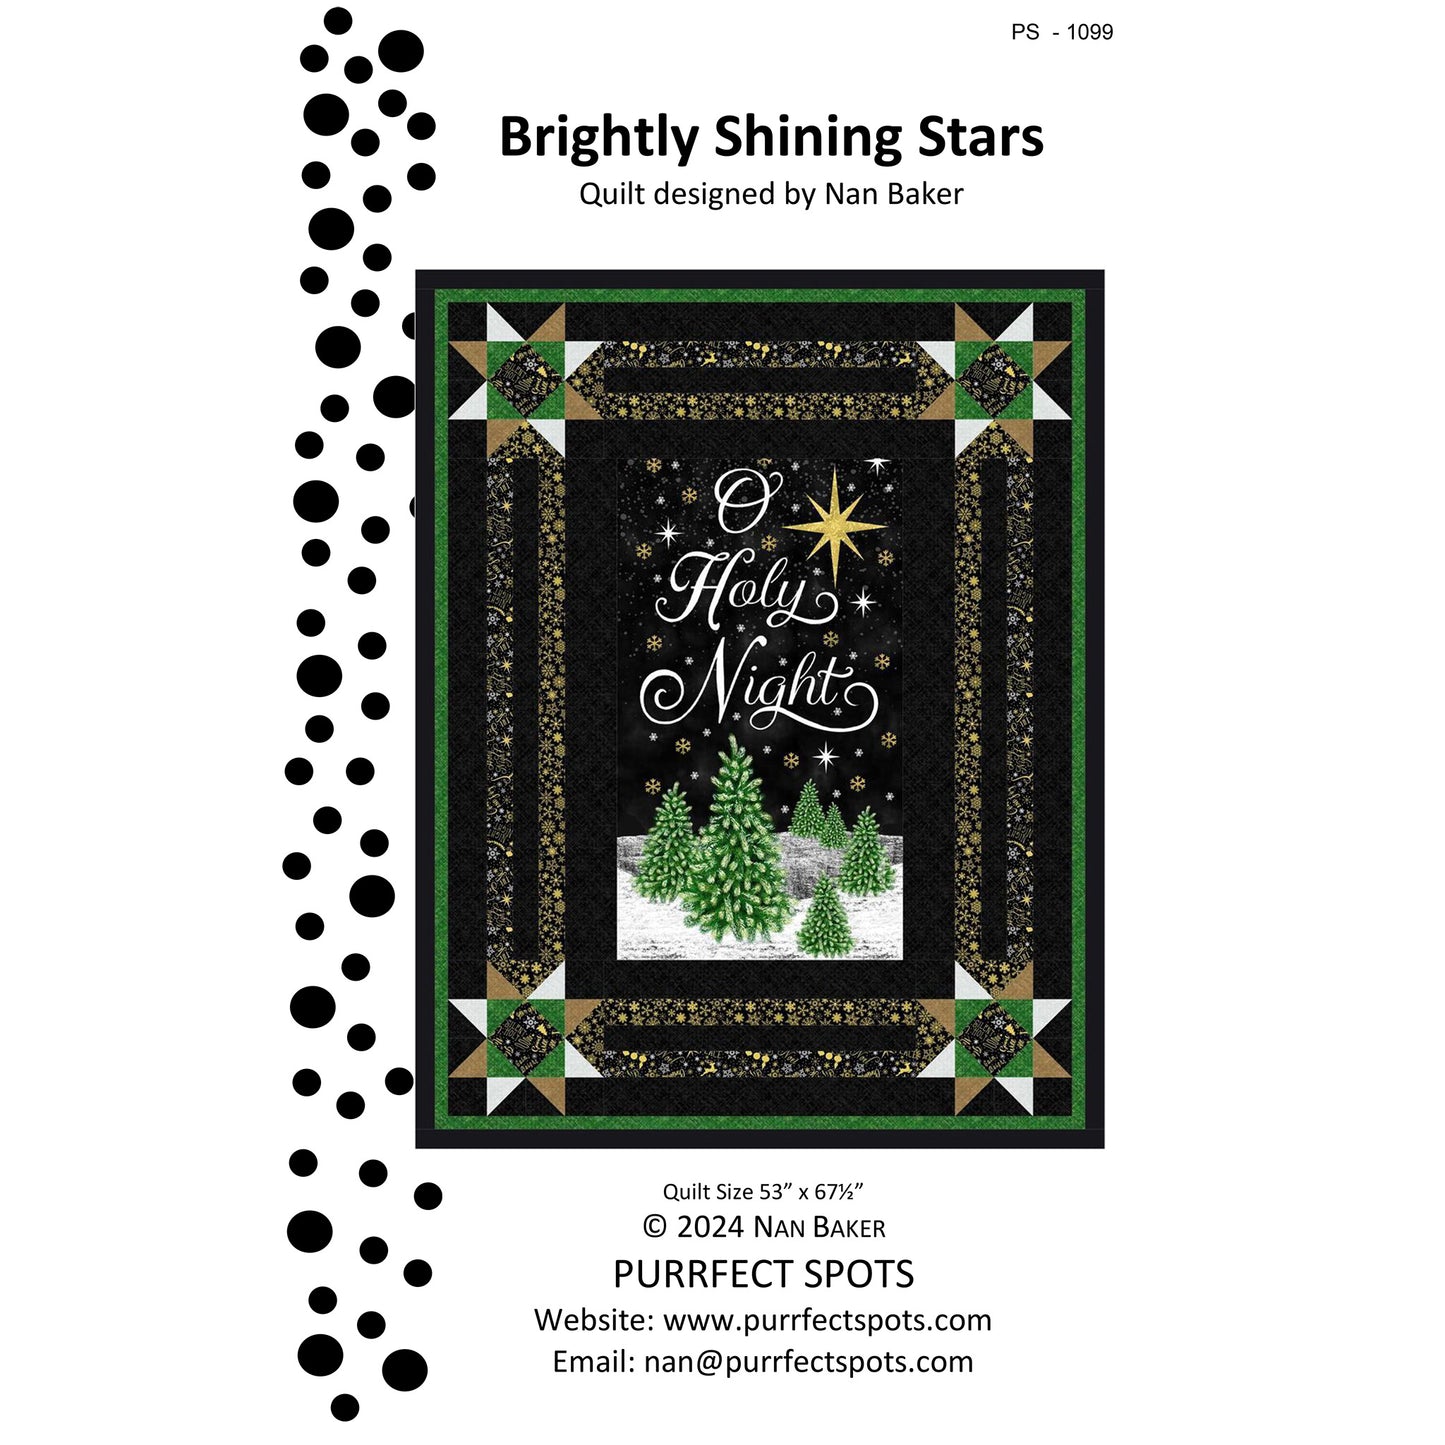 Cover image of pattern for Brightly Shining Stars Quilt.